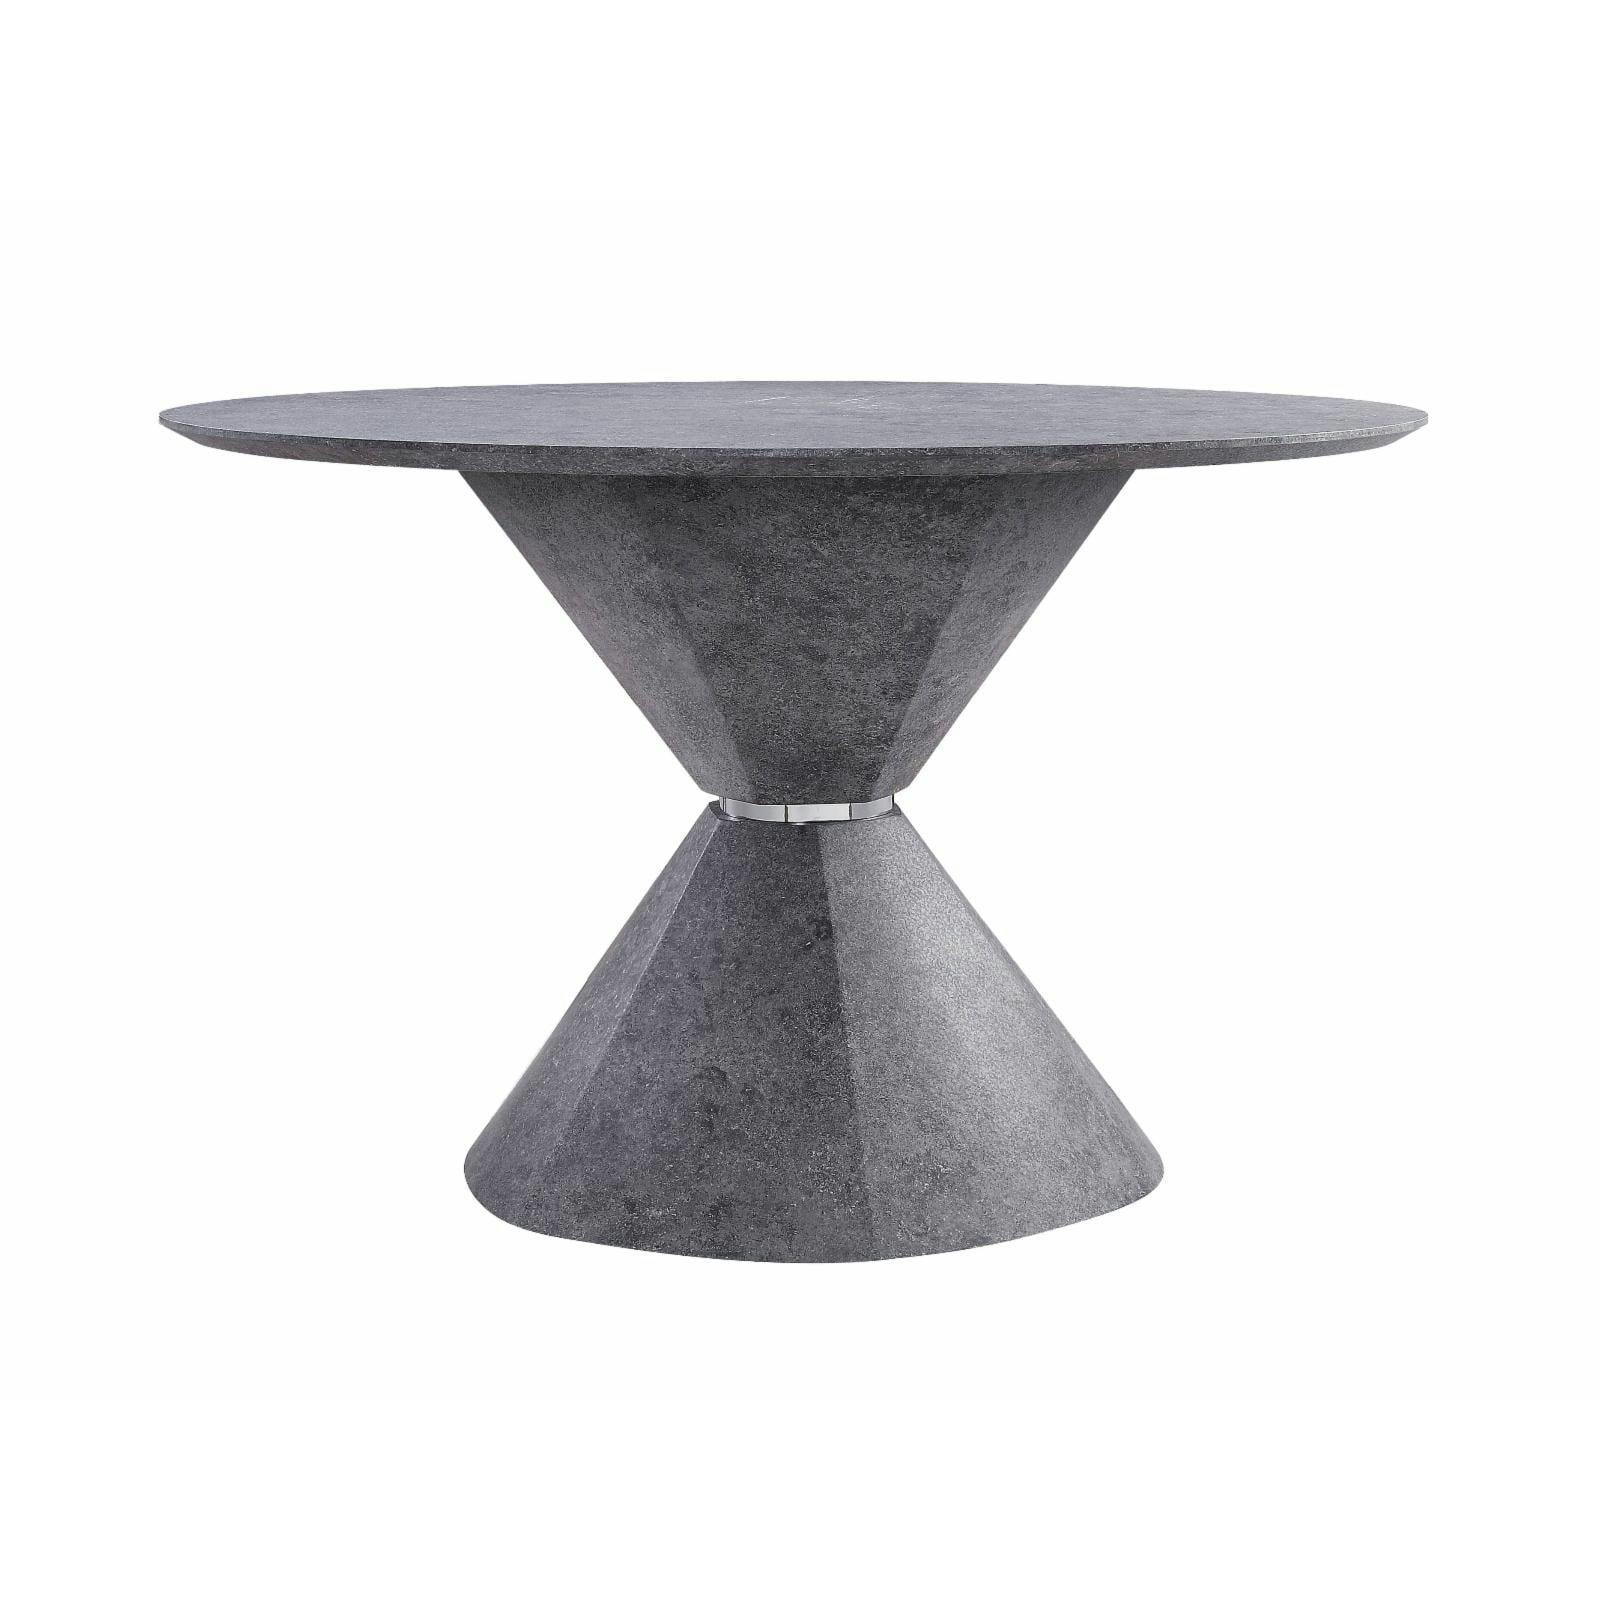 Contemporary Round Wood Dining Table with Faux Concrete Finish